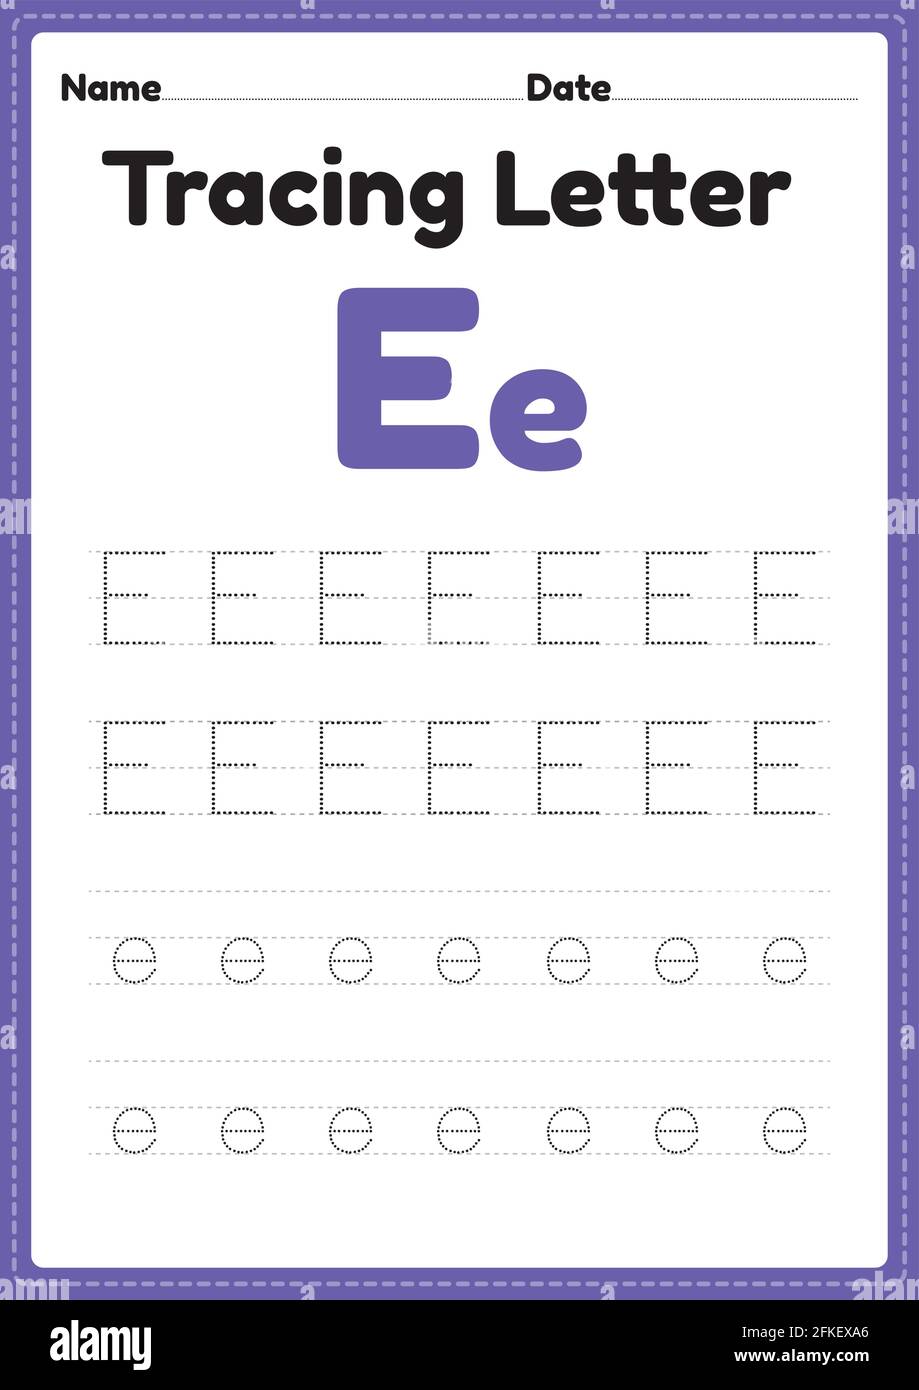 Tracing letter e alphabet worksheet for kindergarten and preschool kids for handwriting practice and educational activities in a printable page illust Stock Vector